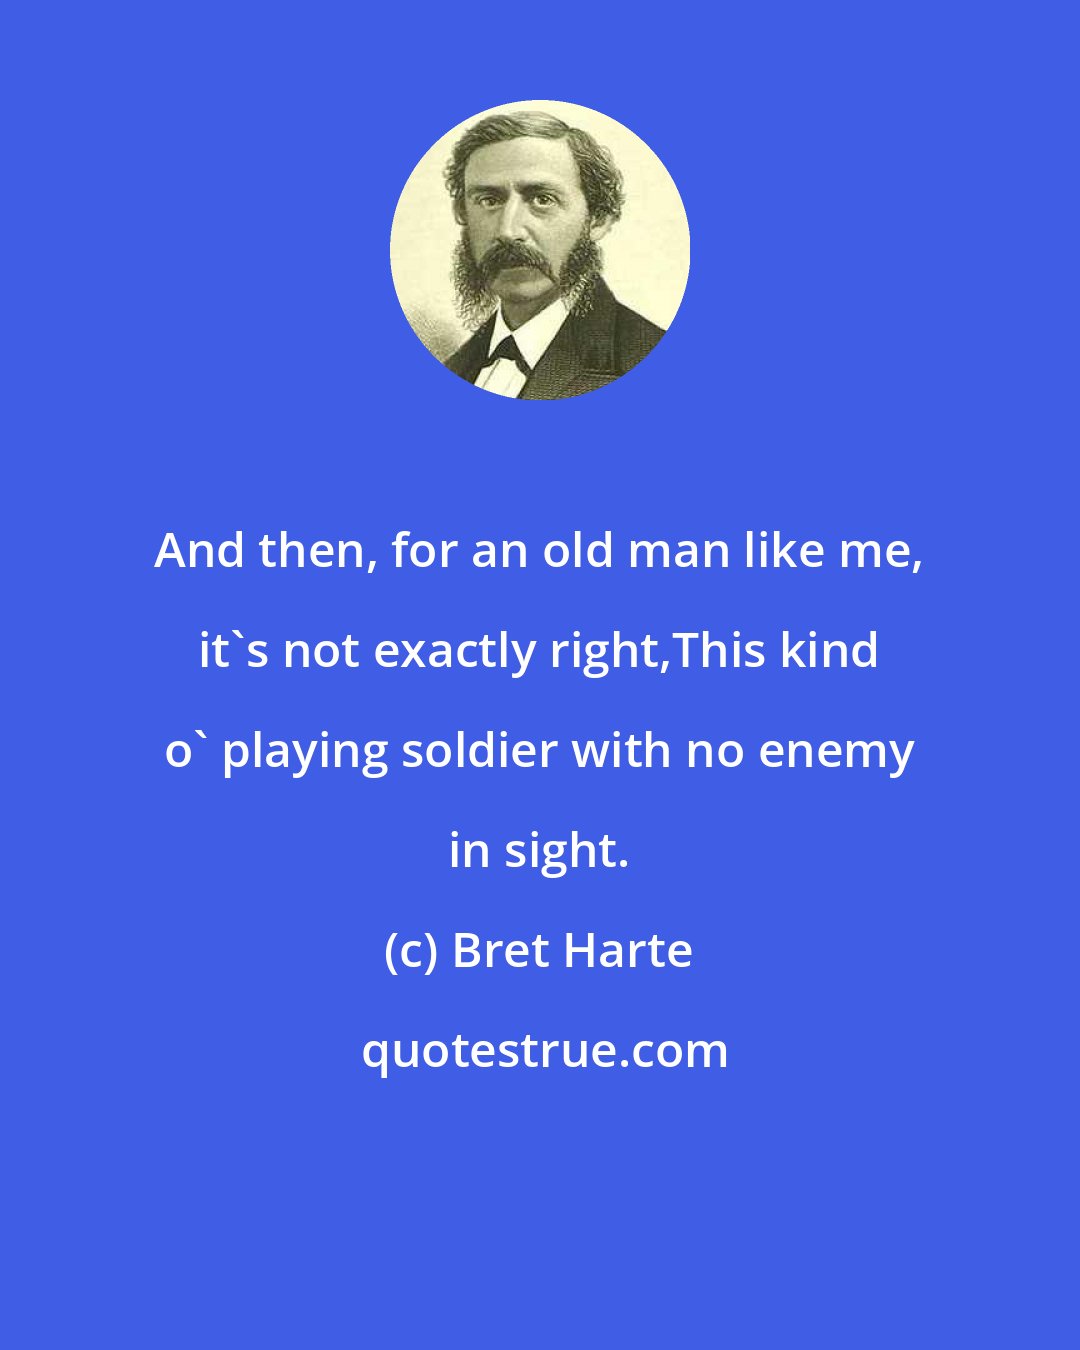 Bret Harte: And then, for an old man like me, it's not exactly right,This kind o' playing soldier with no enemy in sight.